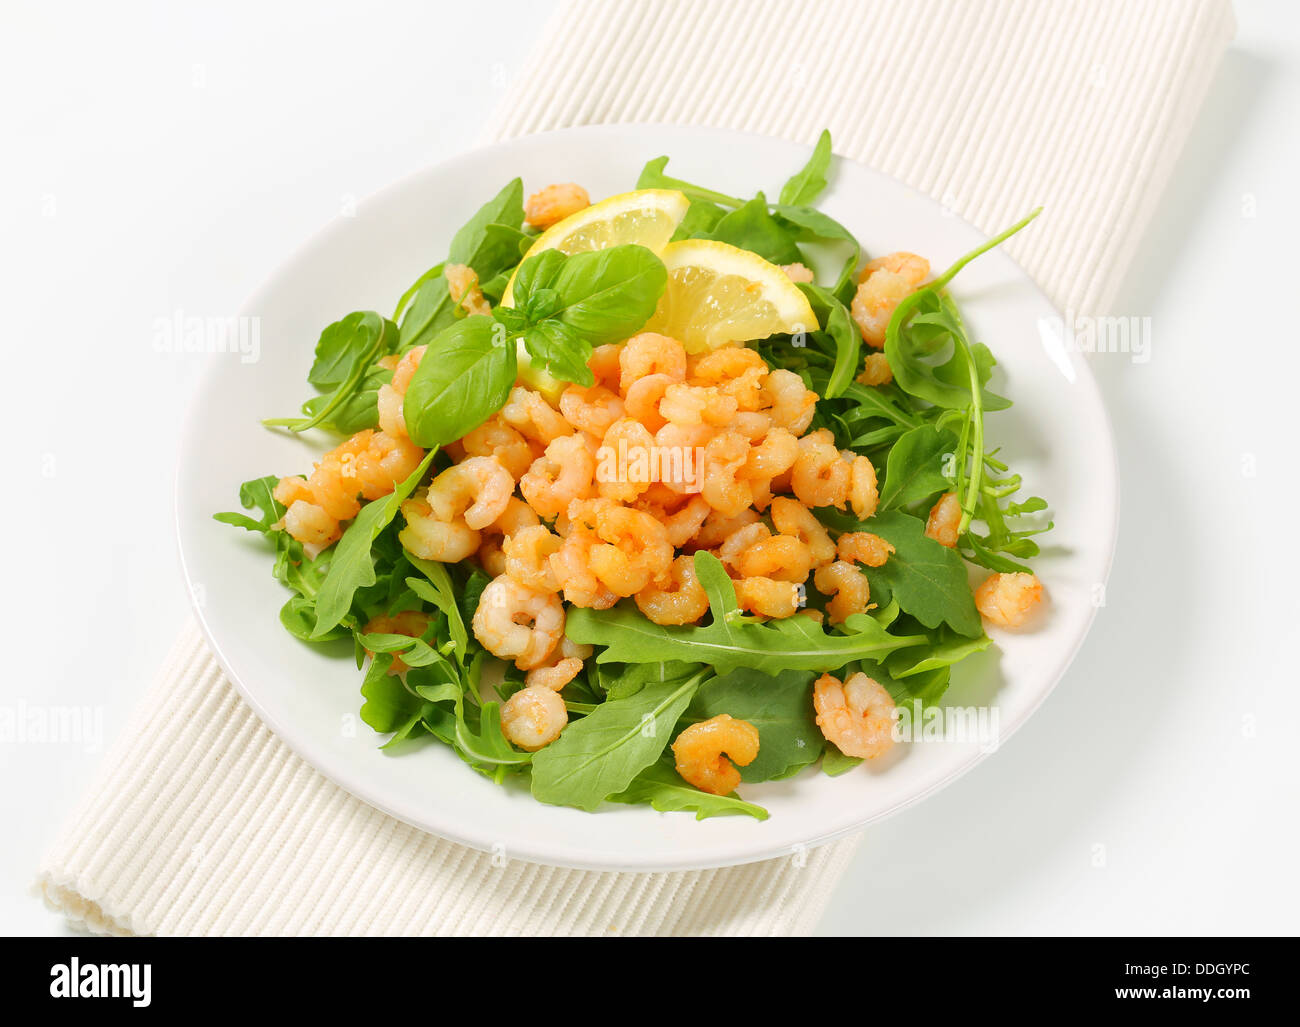 Spicy shrimps on bed of salad greens Stock Photo